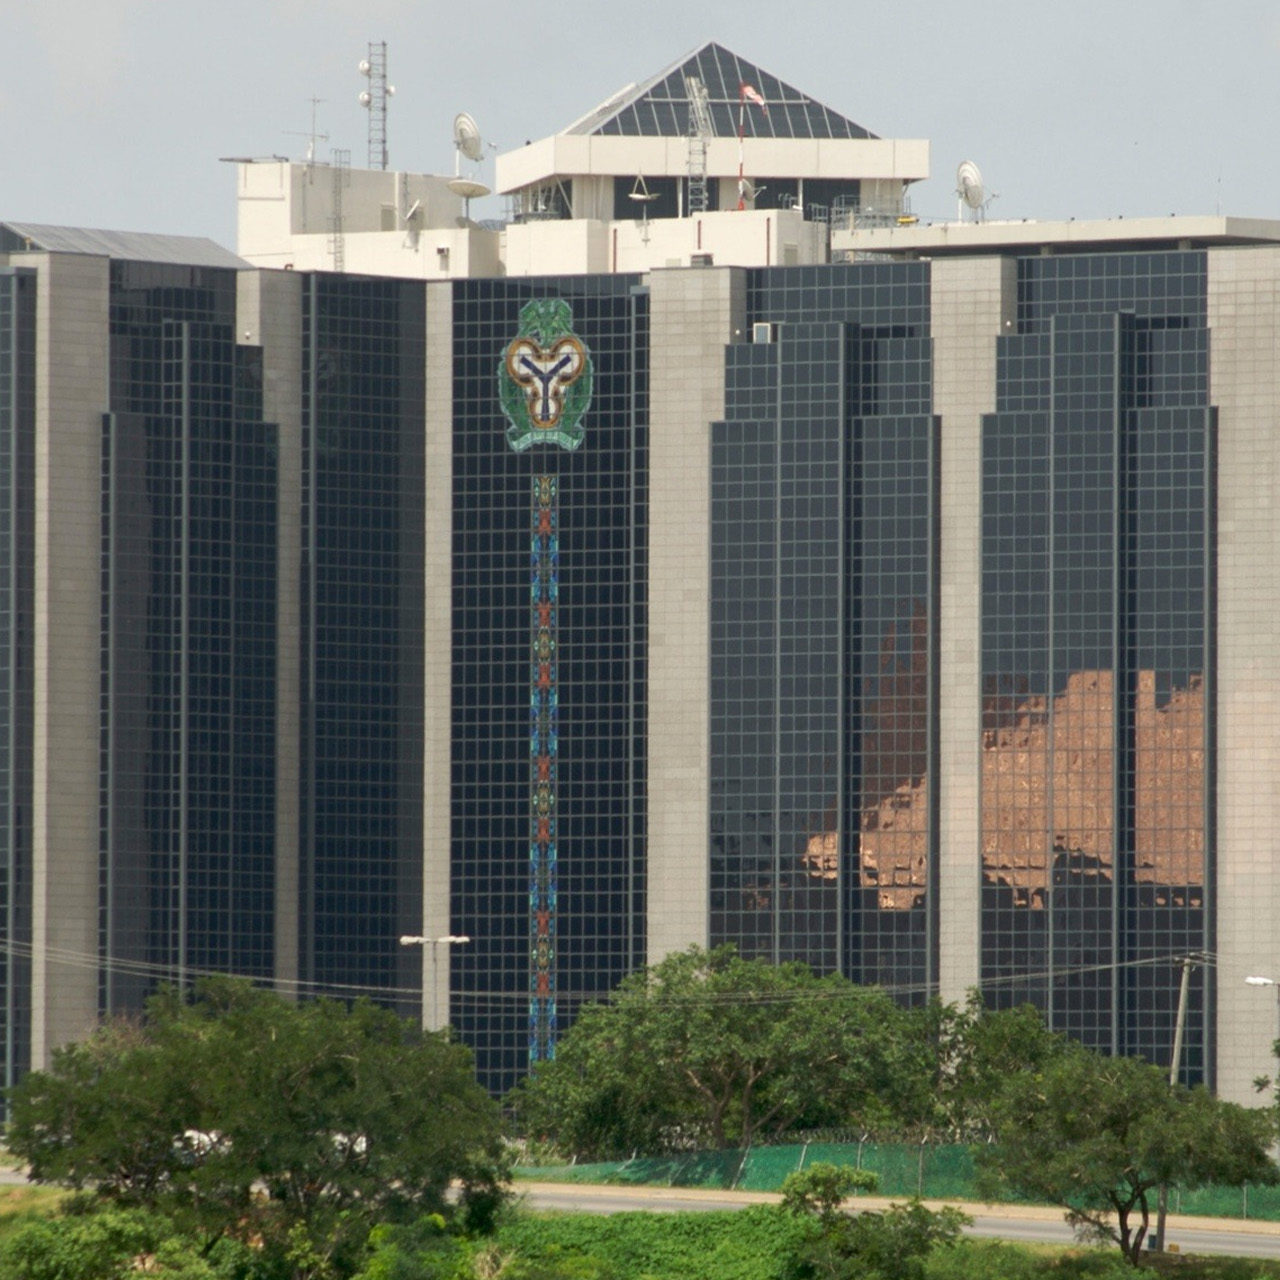 CBN Shakes Up Loan Market with Foreign Currency Collateral Ban